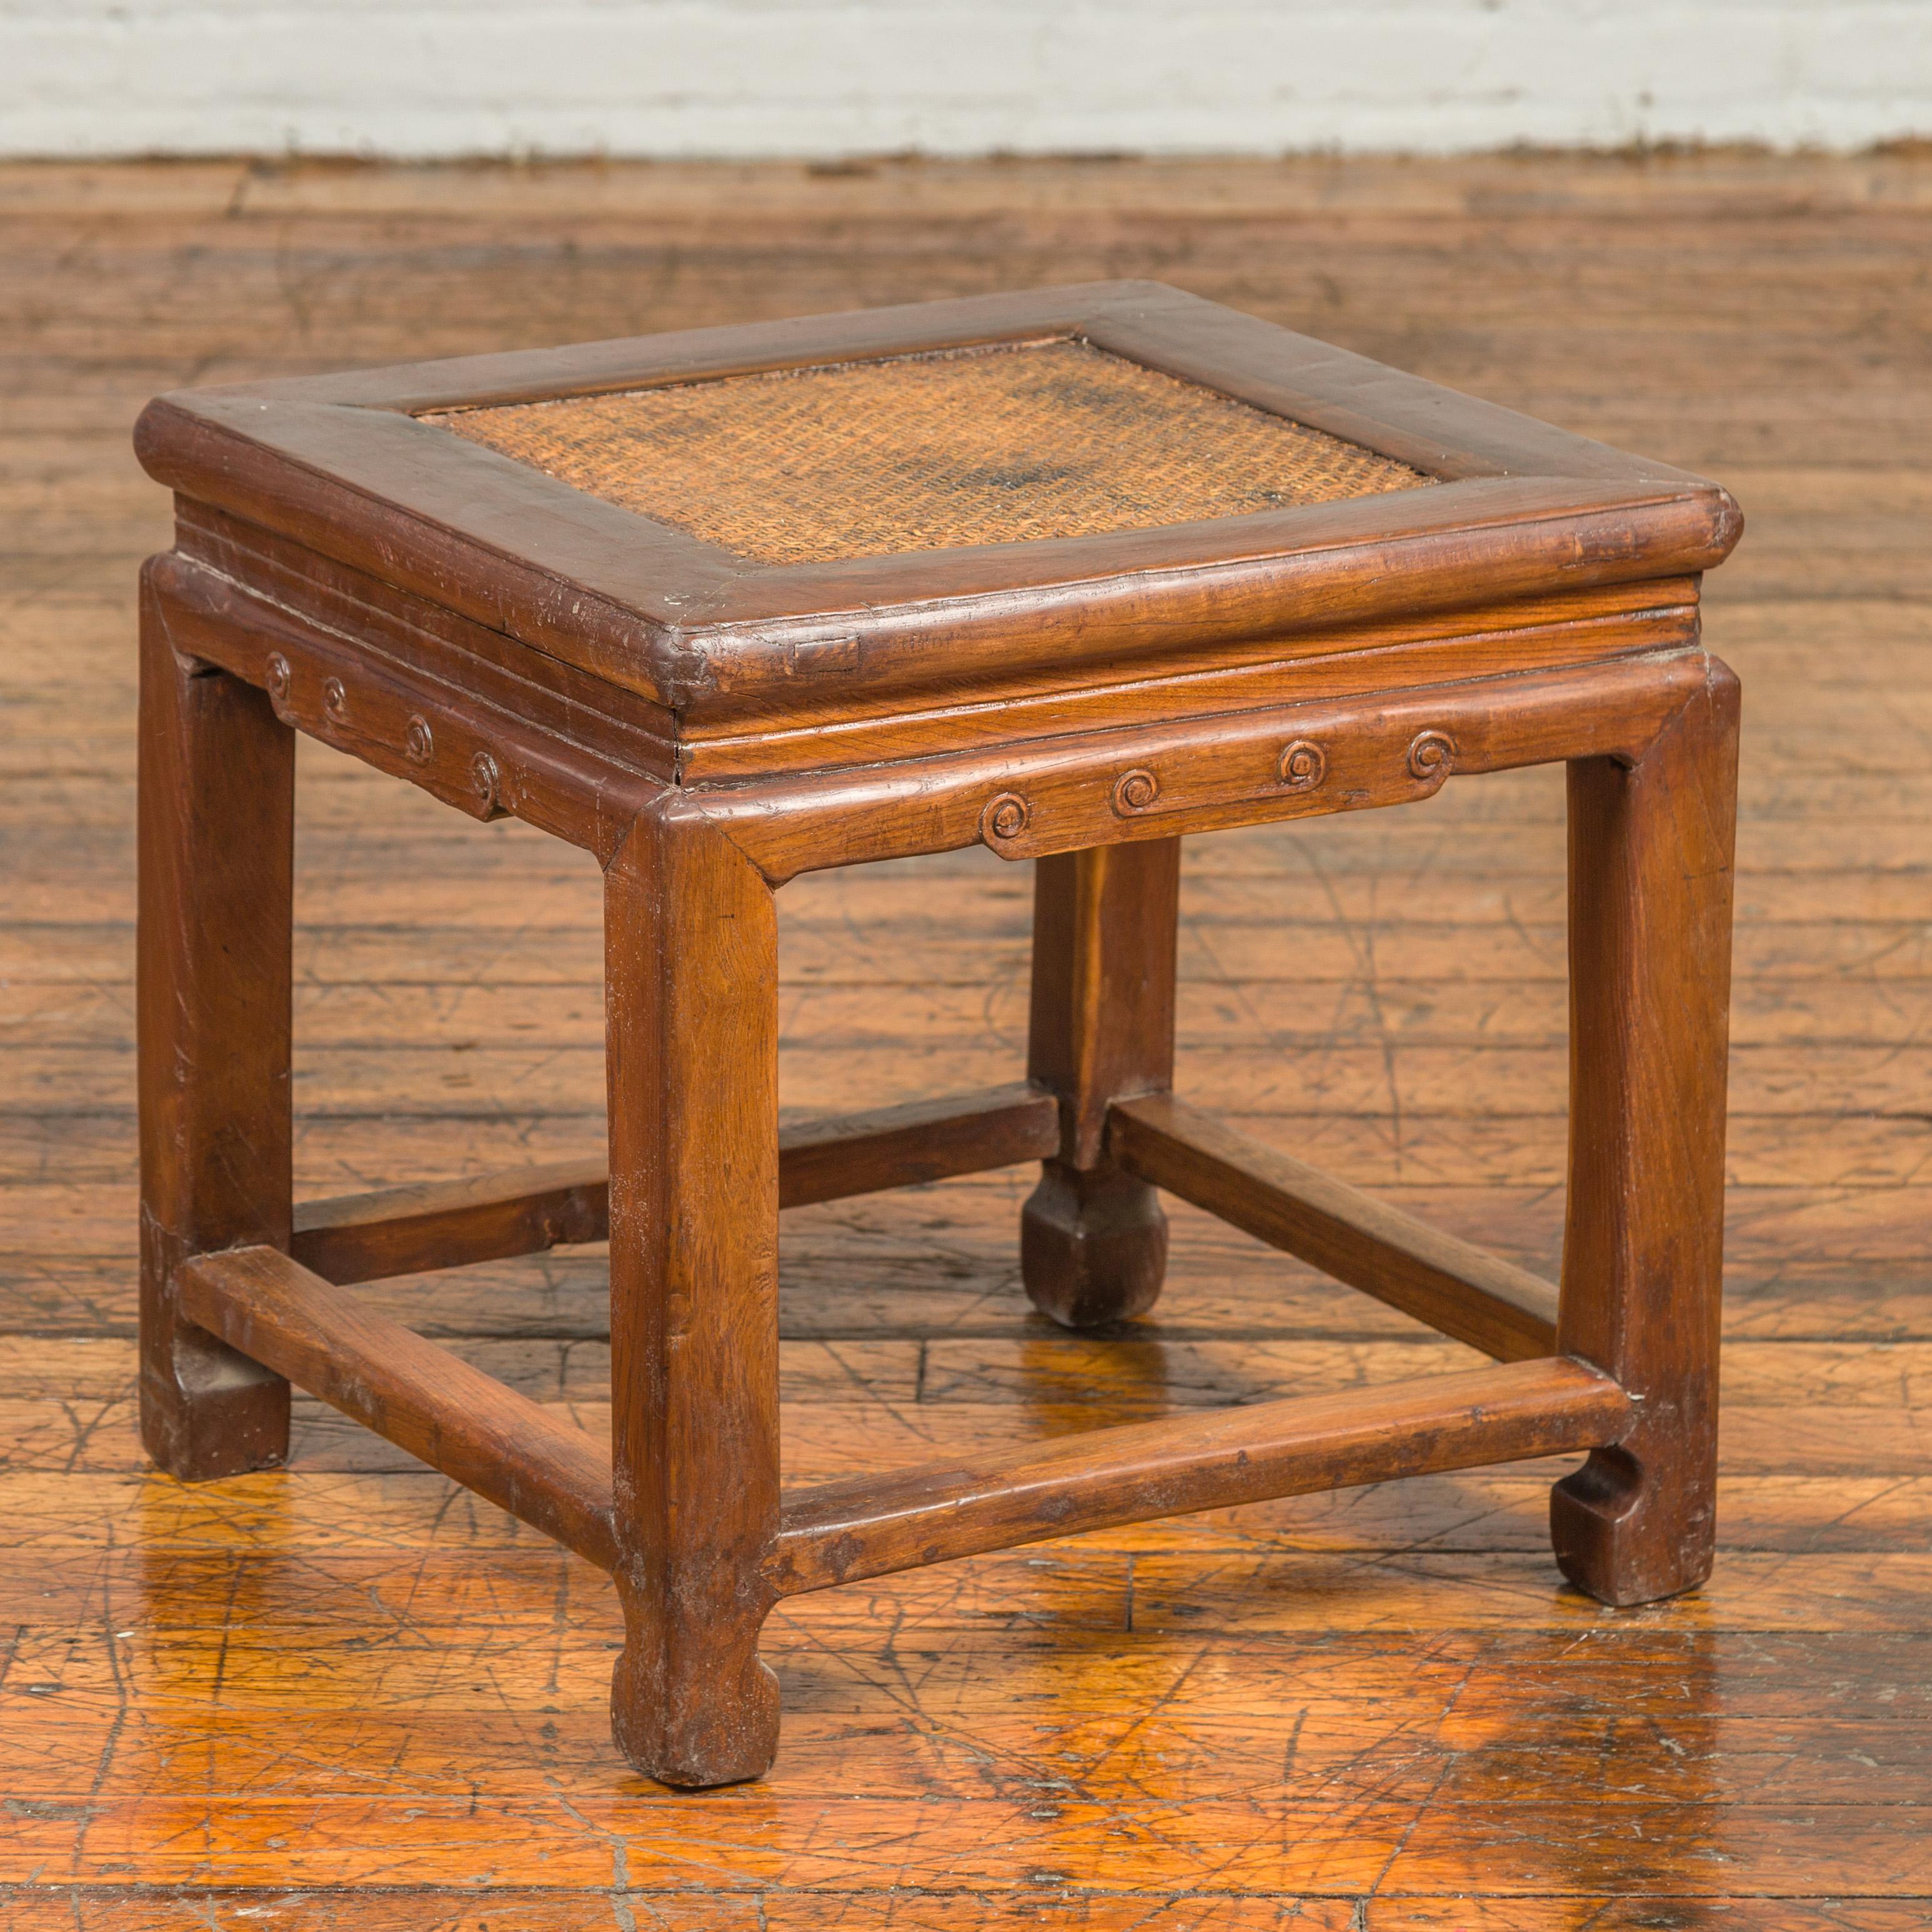 Antique Chinese Ming Style Waisted Stool with Horsehoof Legs and Rattan Inset For Sale 2